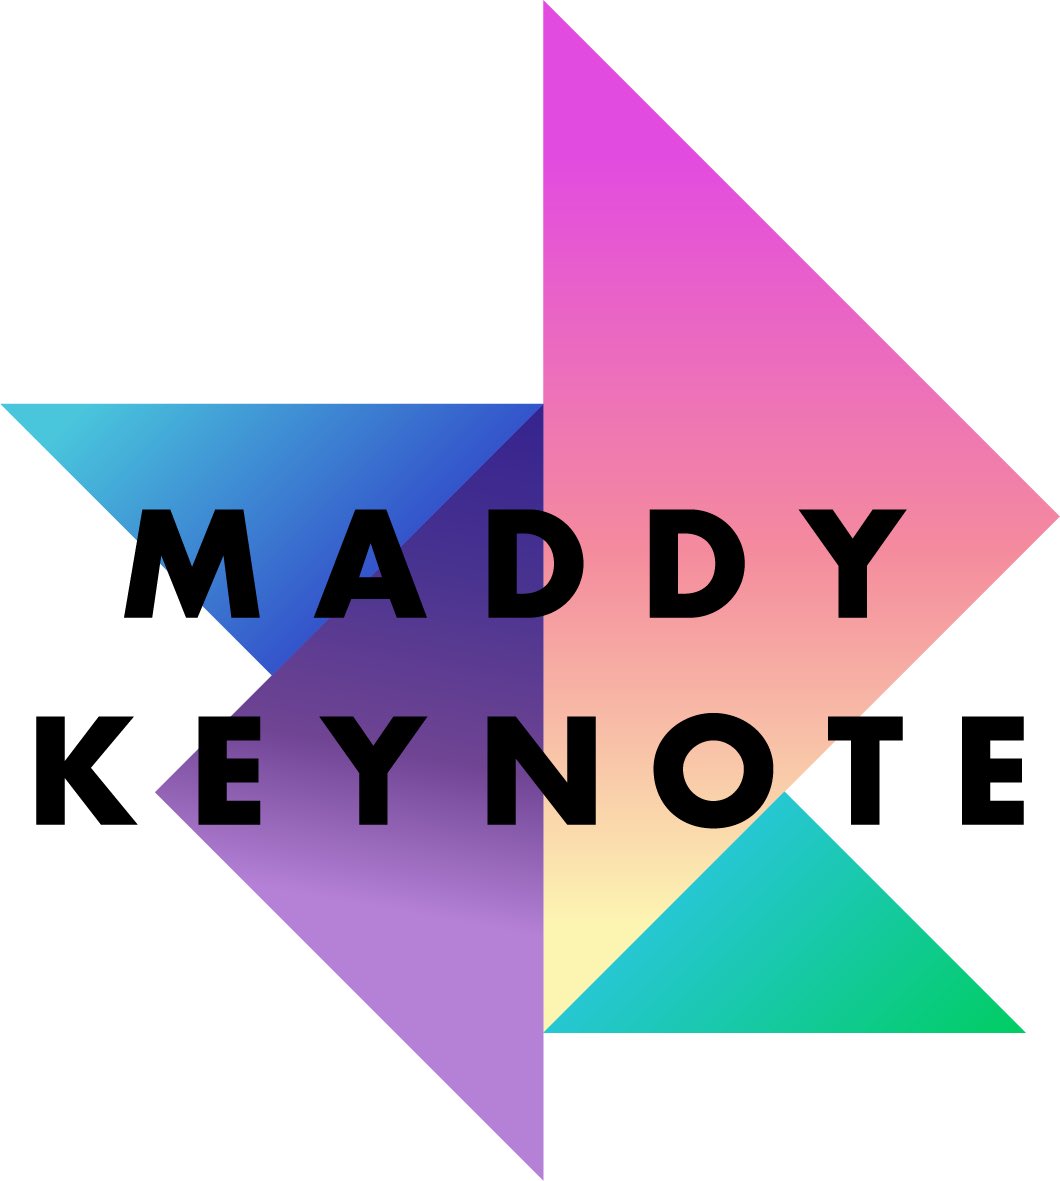 Excited to thank @EPortais for the invitation to the @MaddyKeynote! Can't wait to discover the #future of the economy & participate in discussions about #tech that shapes our lives. Big thanks to all the amazing speakers, incl. @MATUIDIBlaise, Sarah D., and more. #MaddyKeynote 🚀